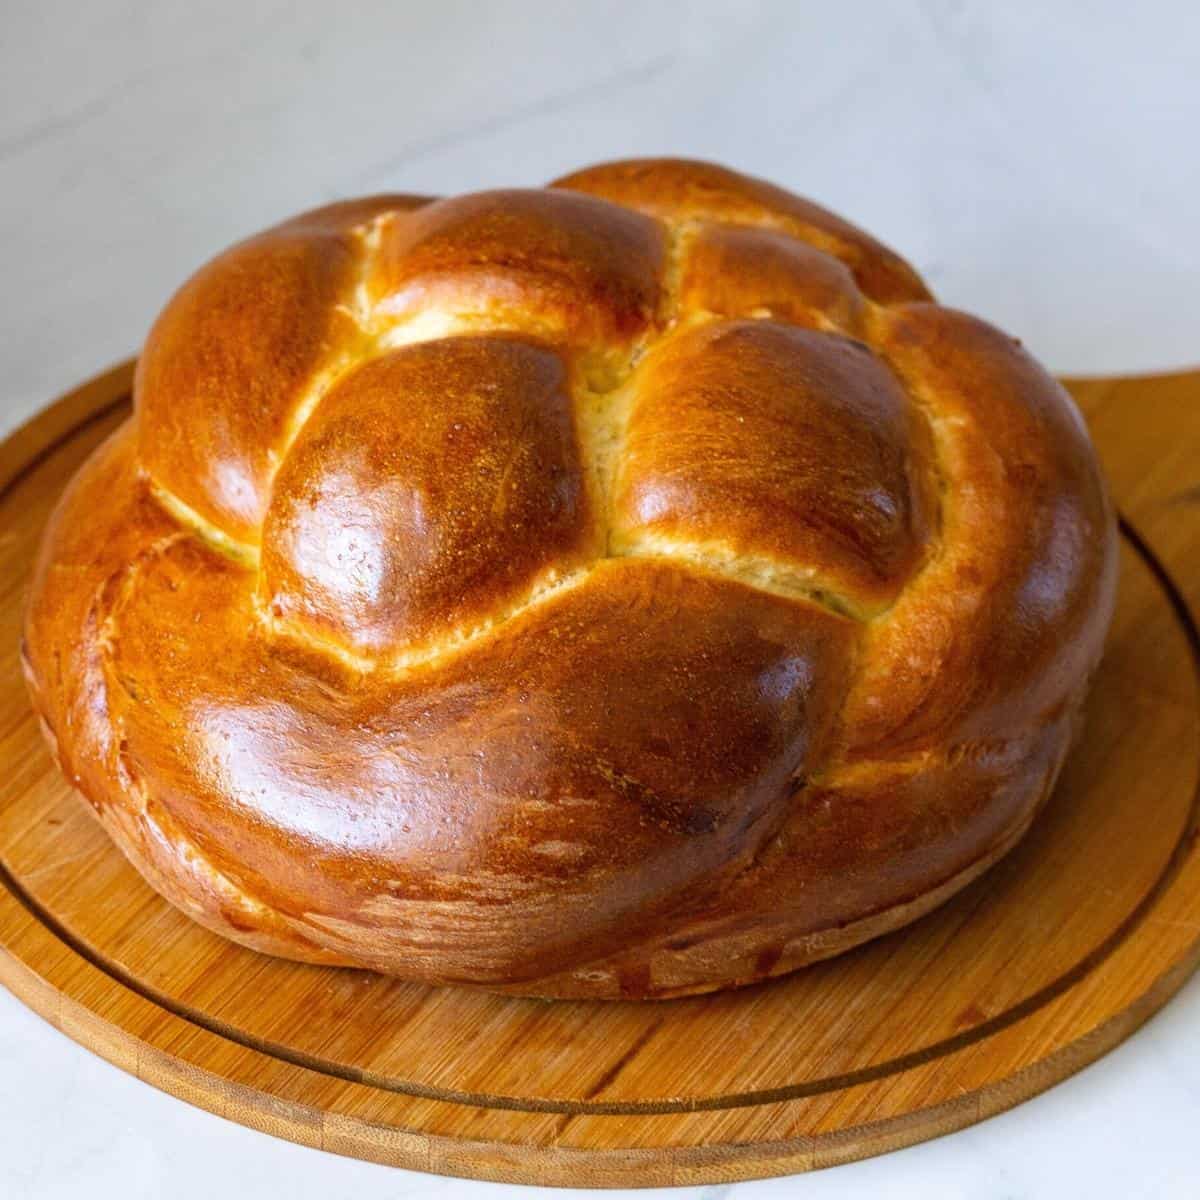 Round challah on a wooden board.